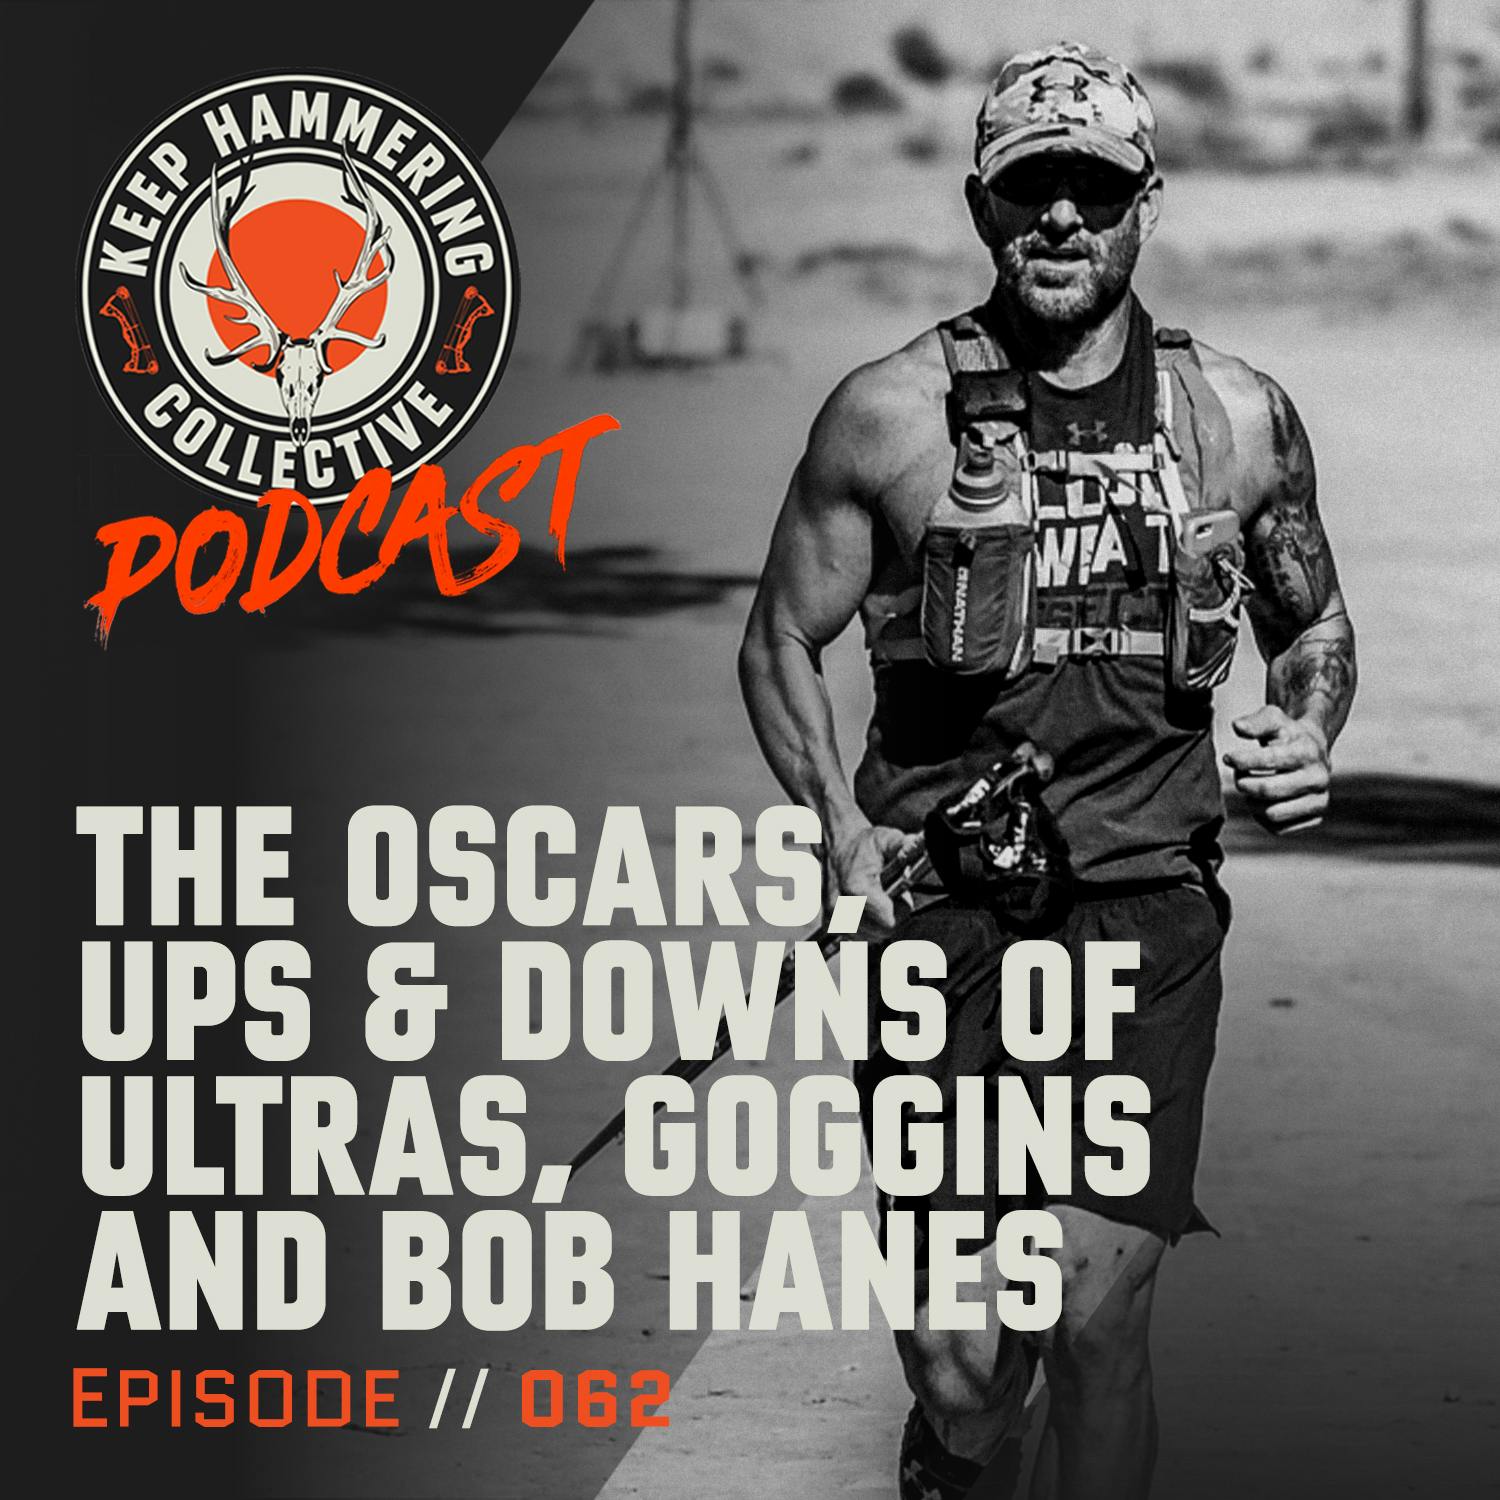 KHC 062 - The Oscars, Ups & Downs of Ultras, Goggins and Bob Hanes